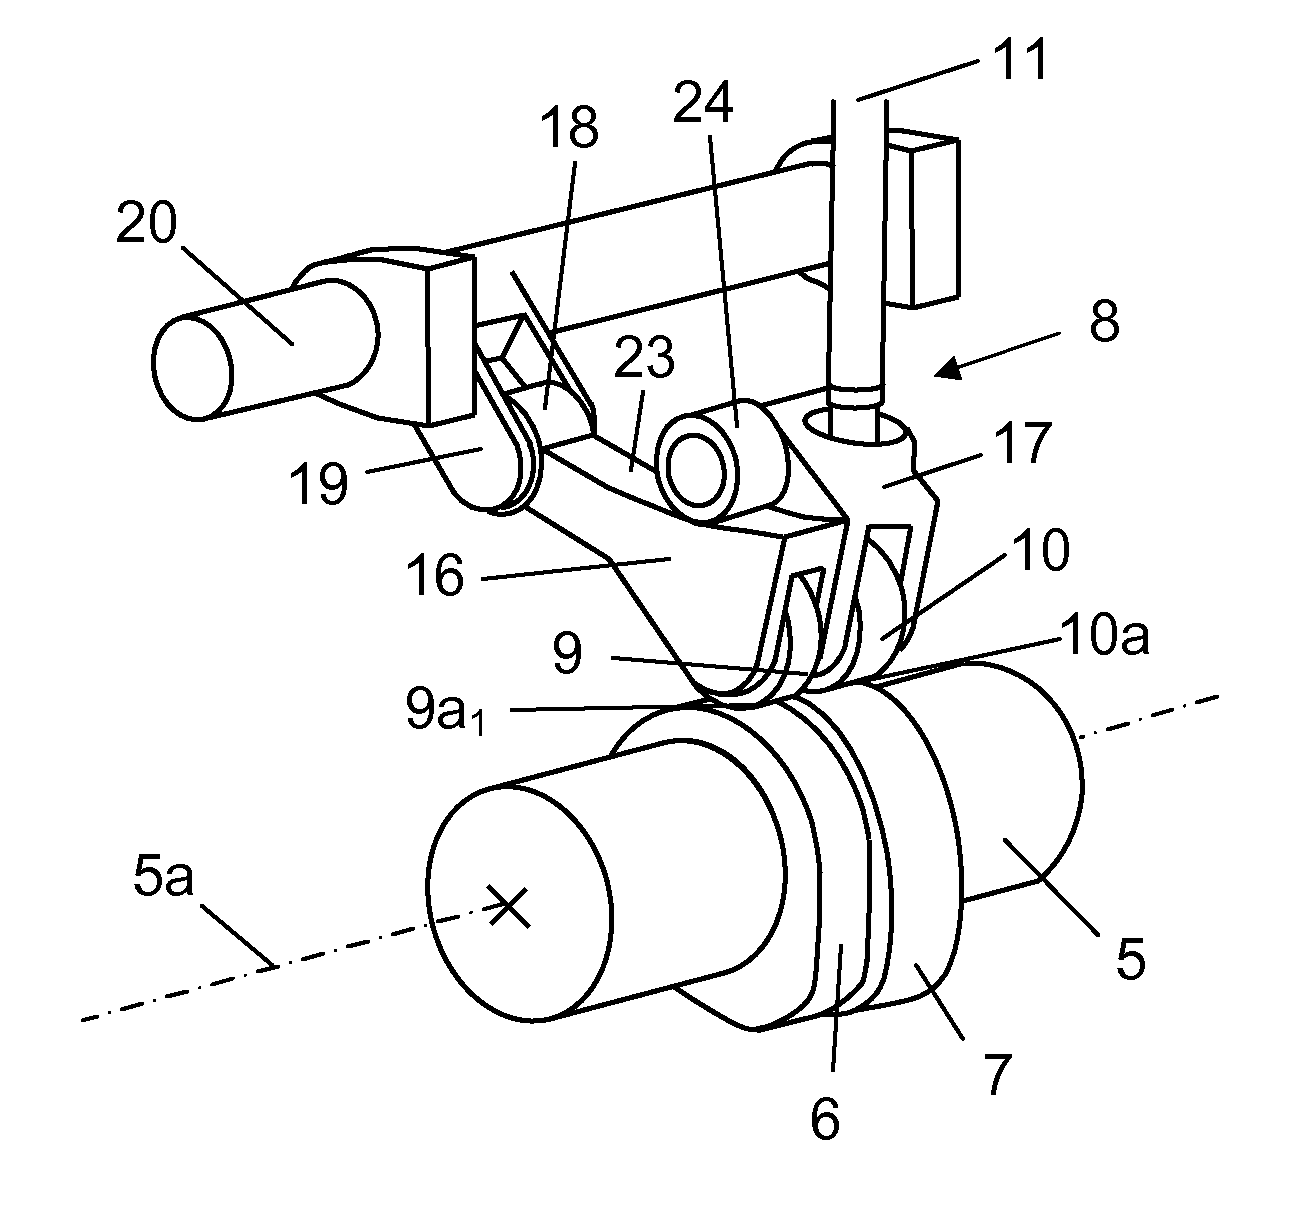 Valve lift device for a combustion engine